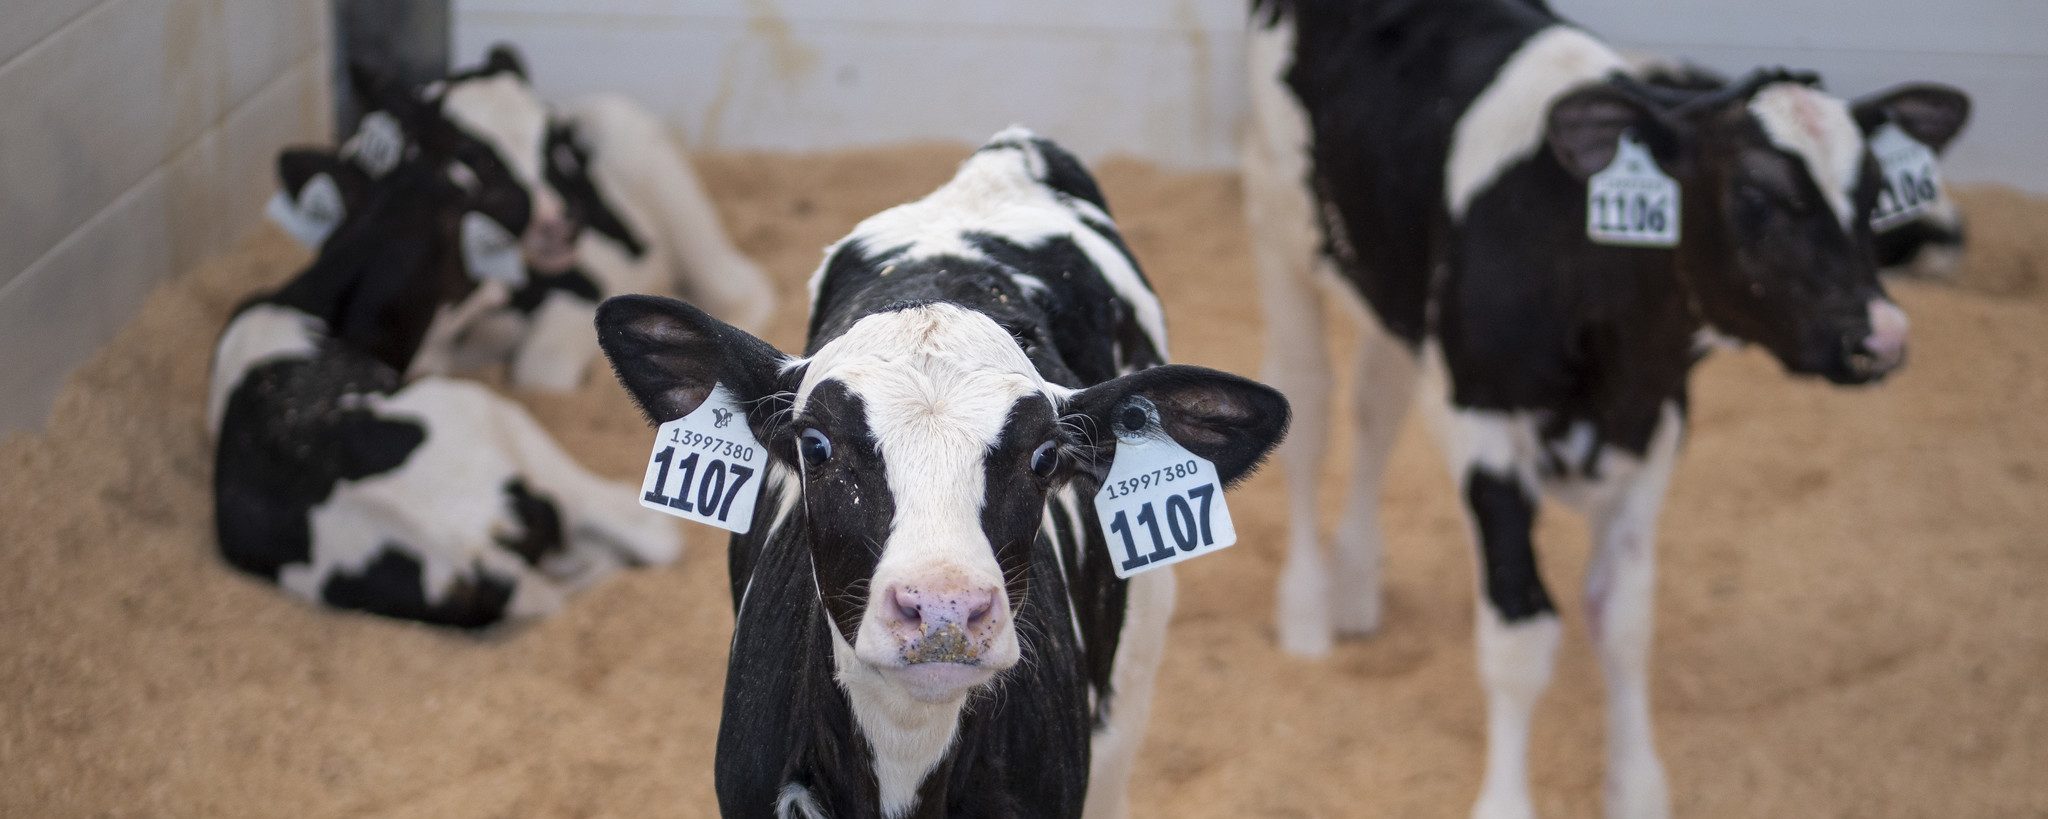 Stereotypic Behaviour in Dairy Animals and its Implications for